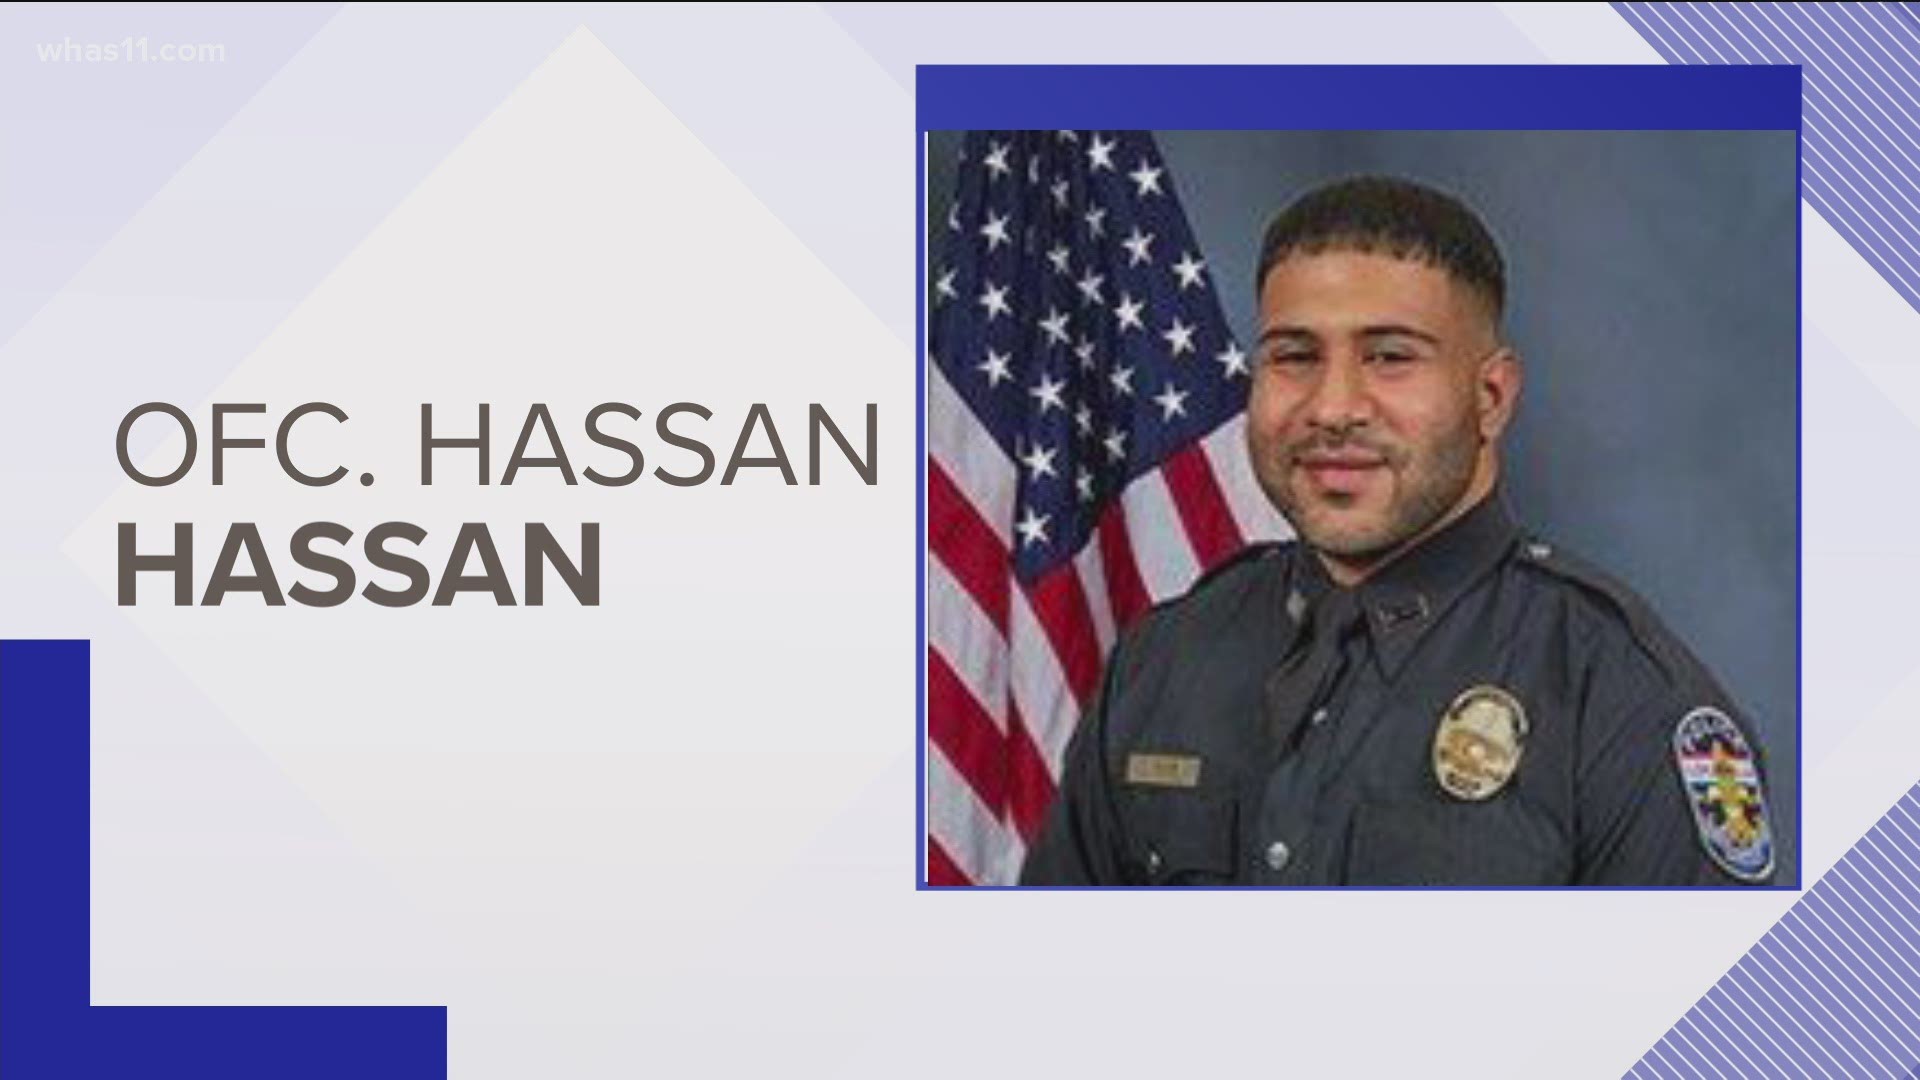 A statement from LMPS says 25-year-old Officer Hassan Hassan experienced a medical emergency while off duty. He was rushed to the hospital where he died.